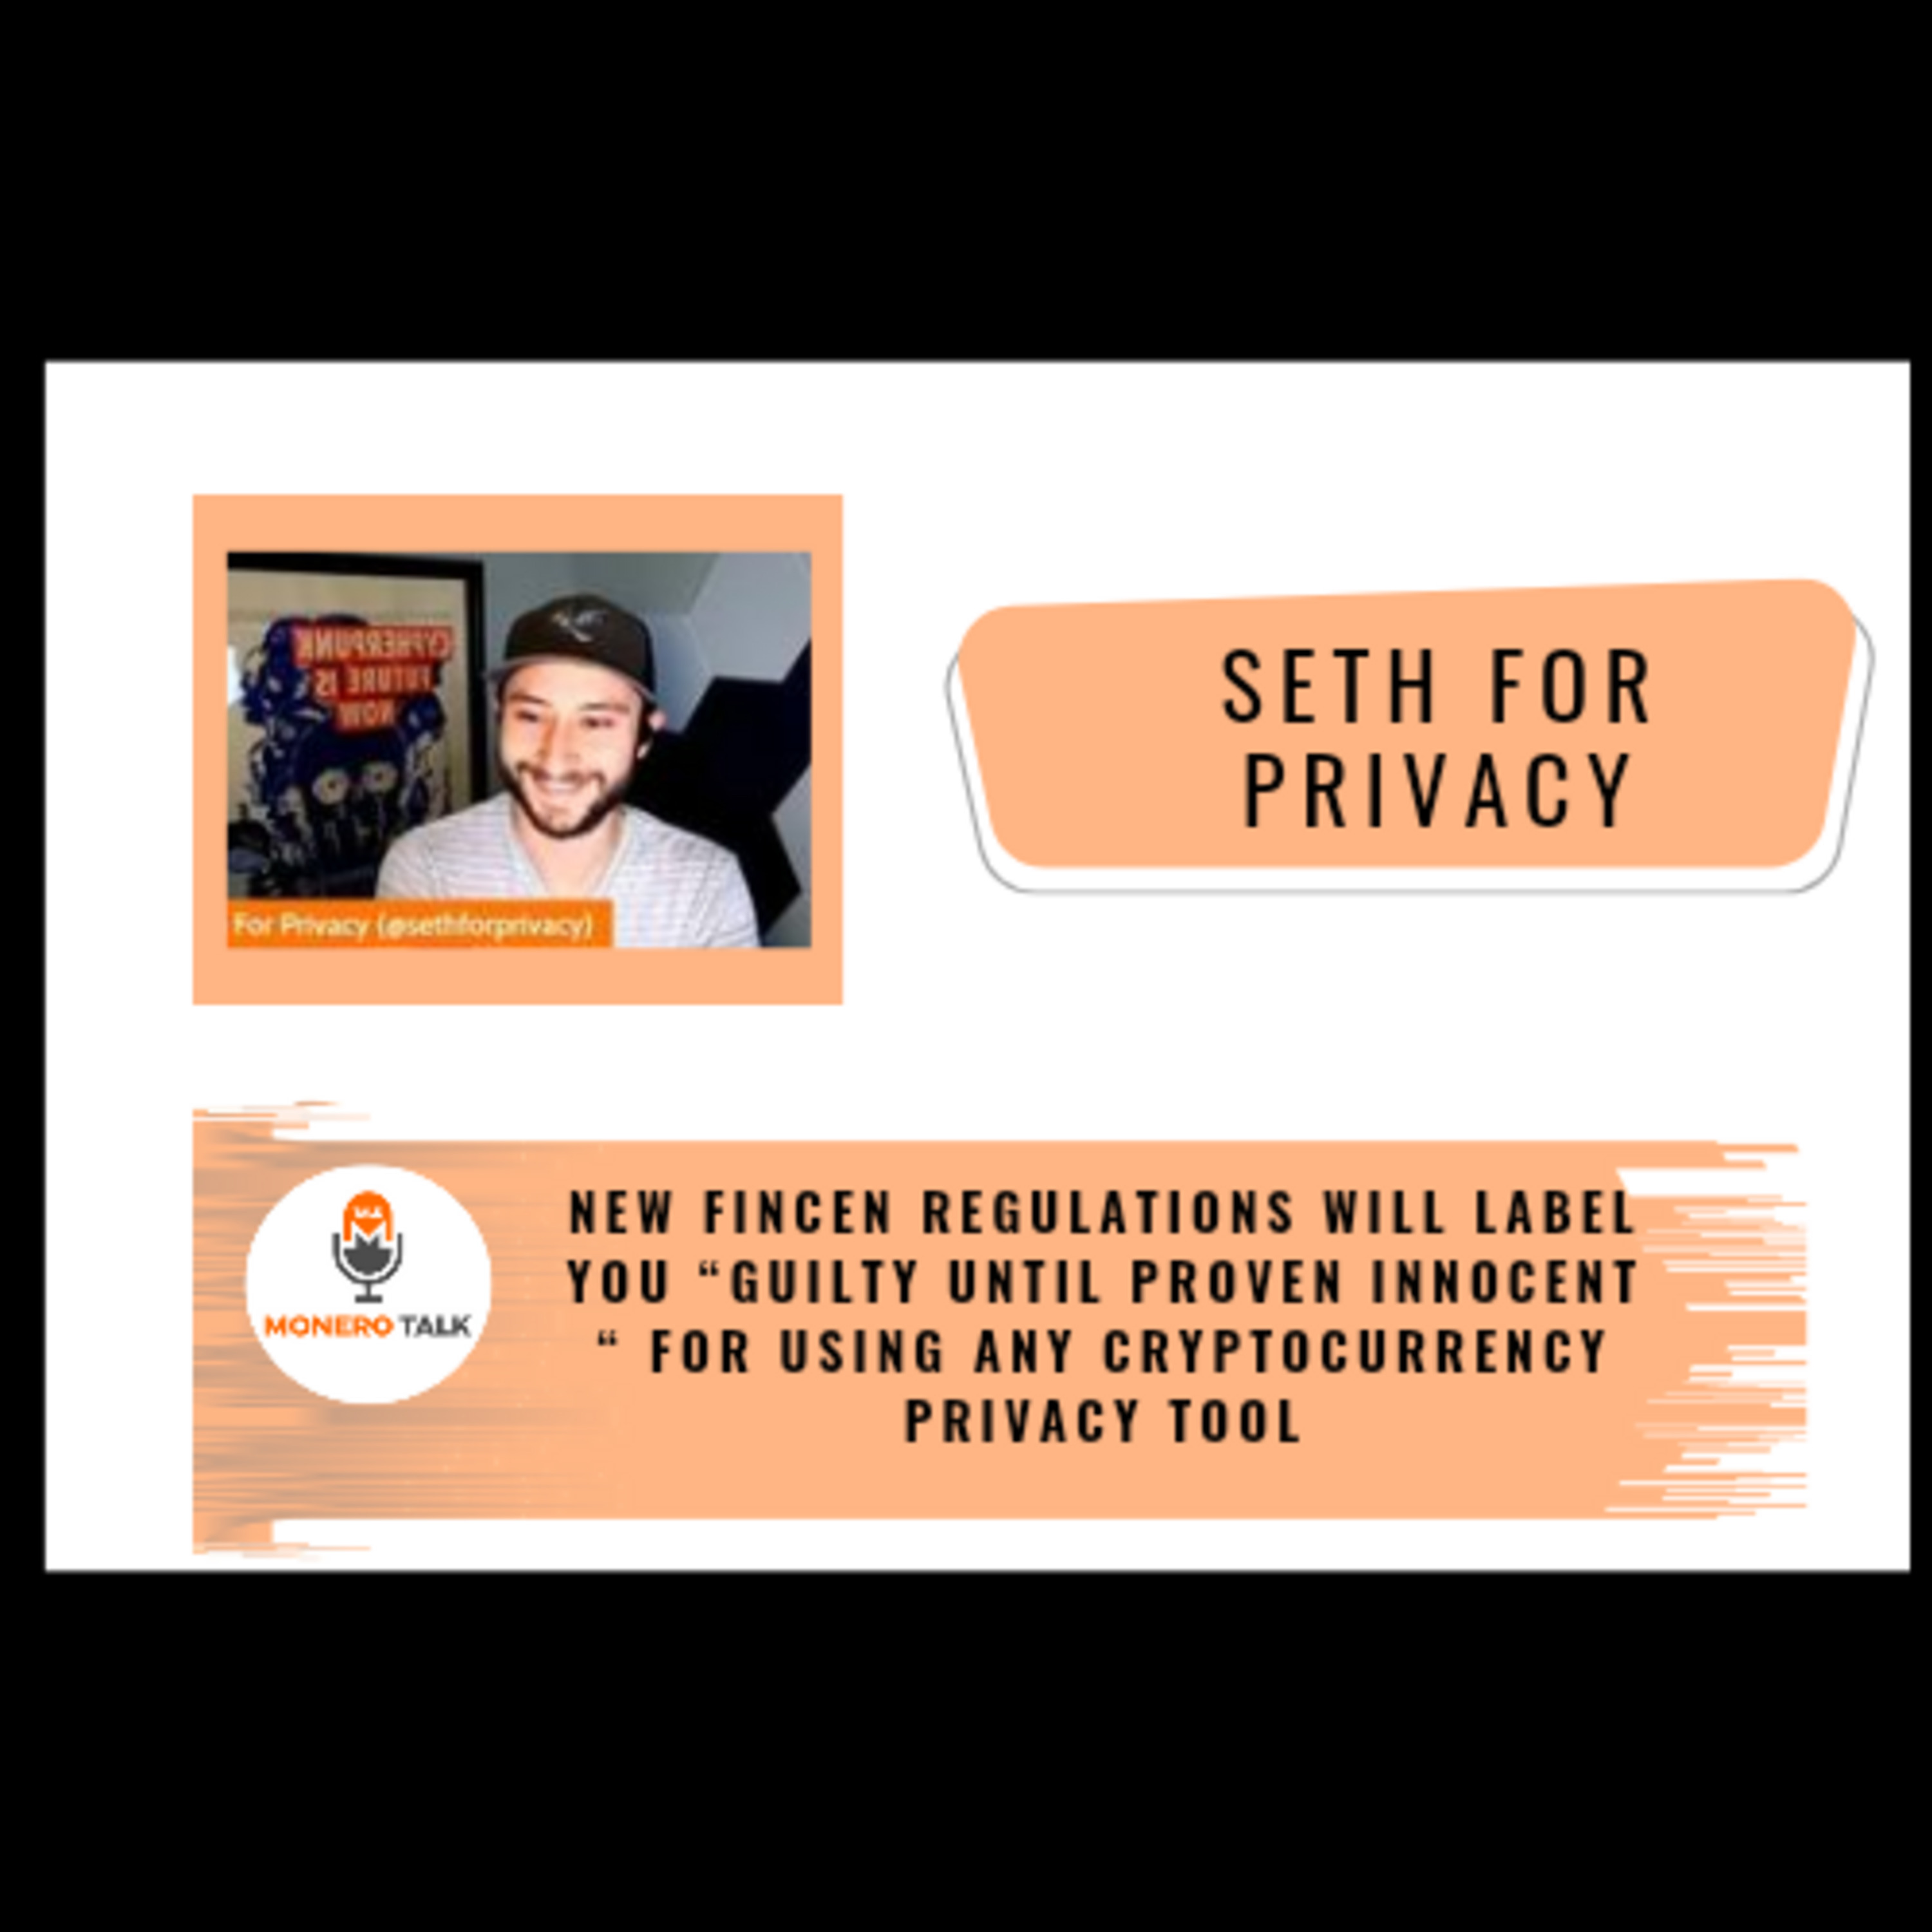 New FinCEN regulations will label you “guilty until proven innocent “ for using any cryptocurrency privacy tool w/ Seth for Privacy